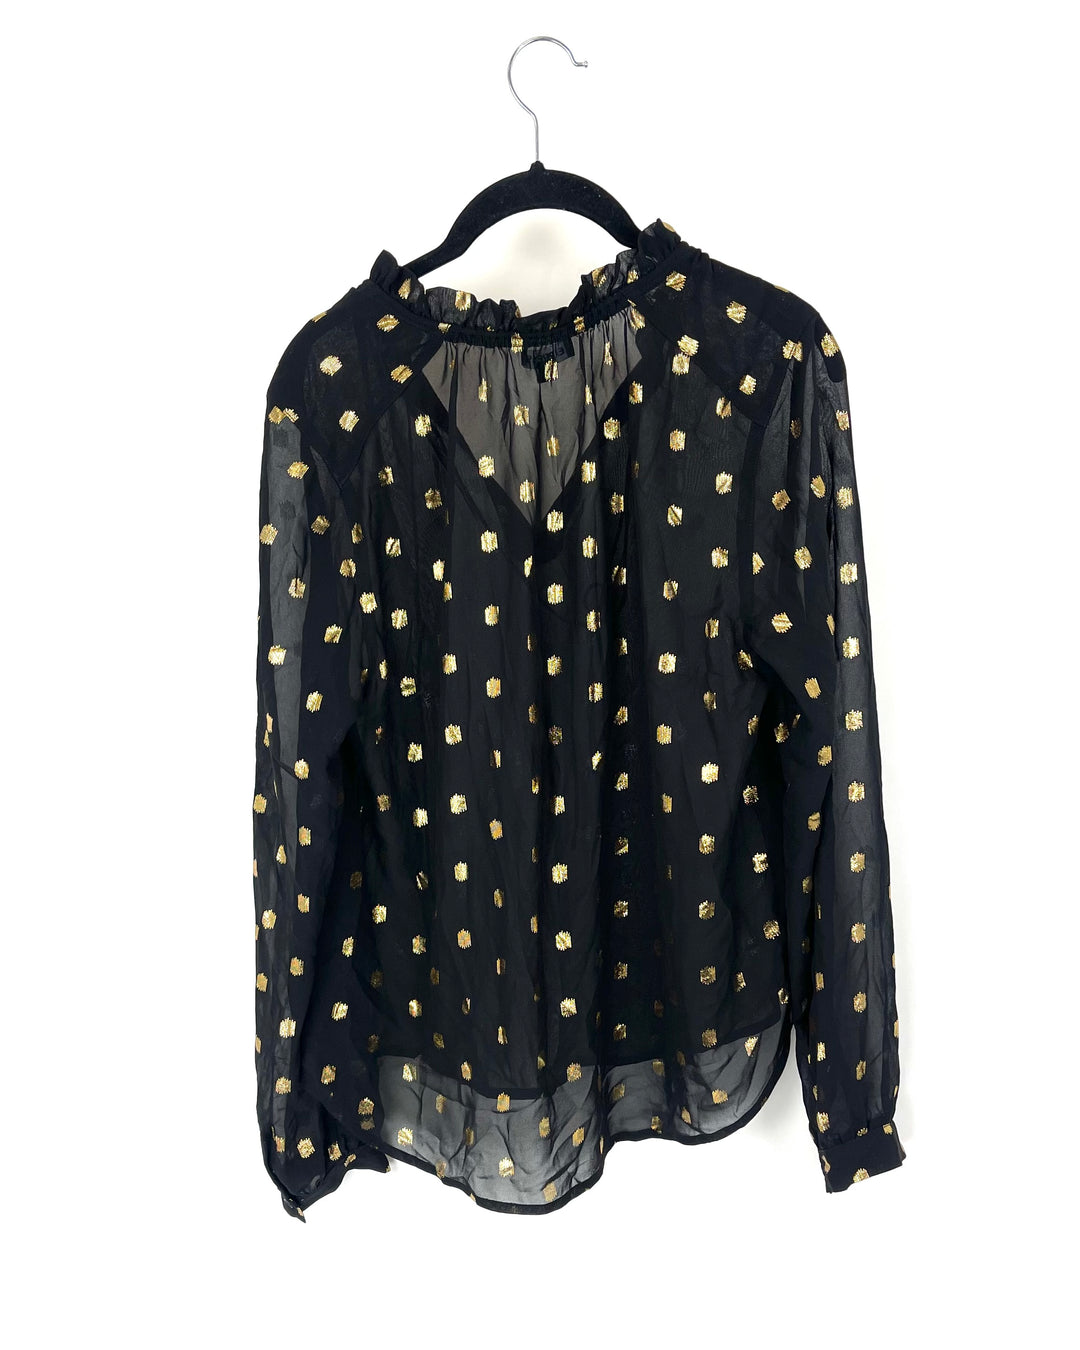 Sheer Black and Gold Long Sleeve Top - Small